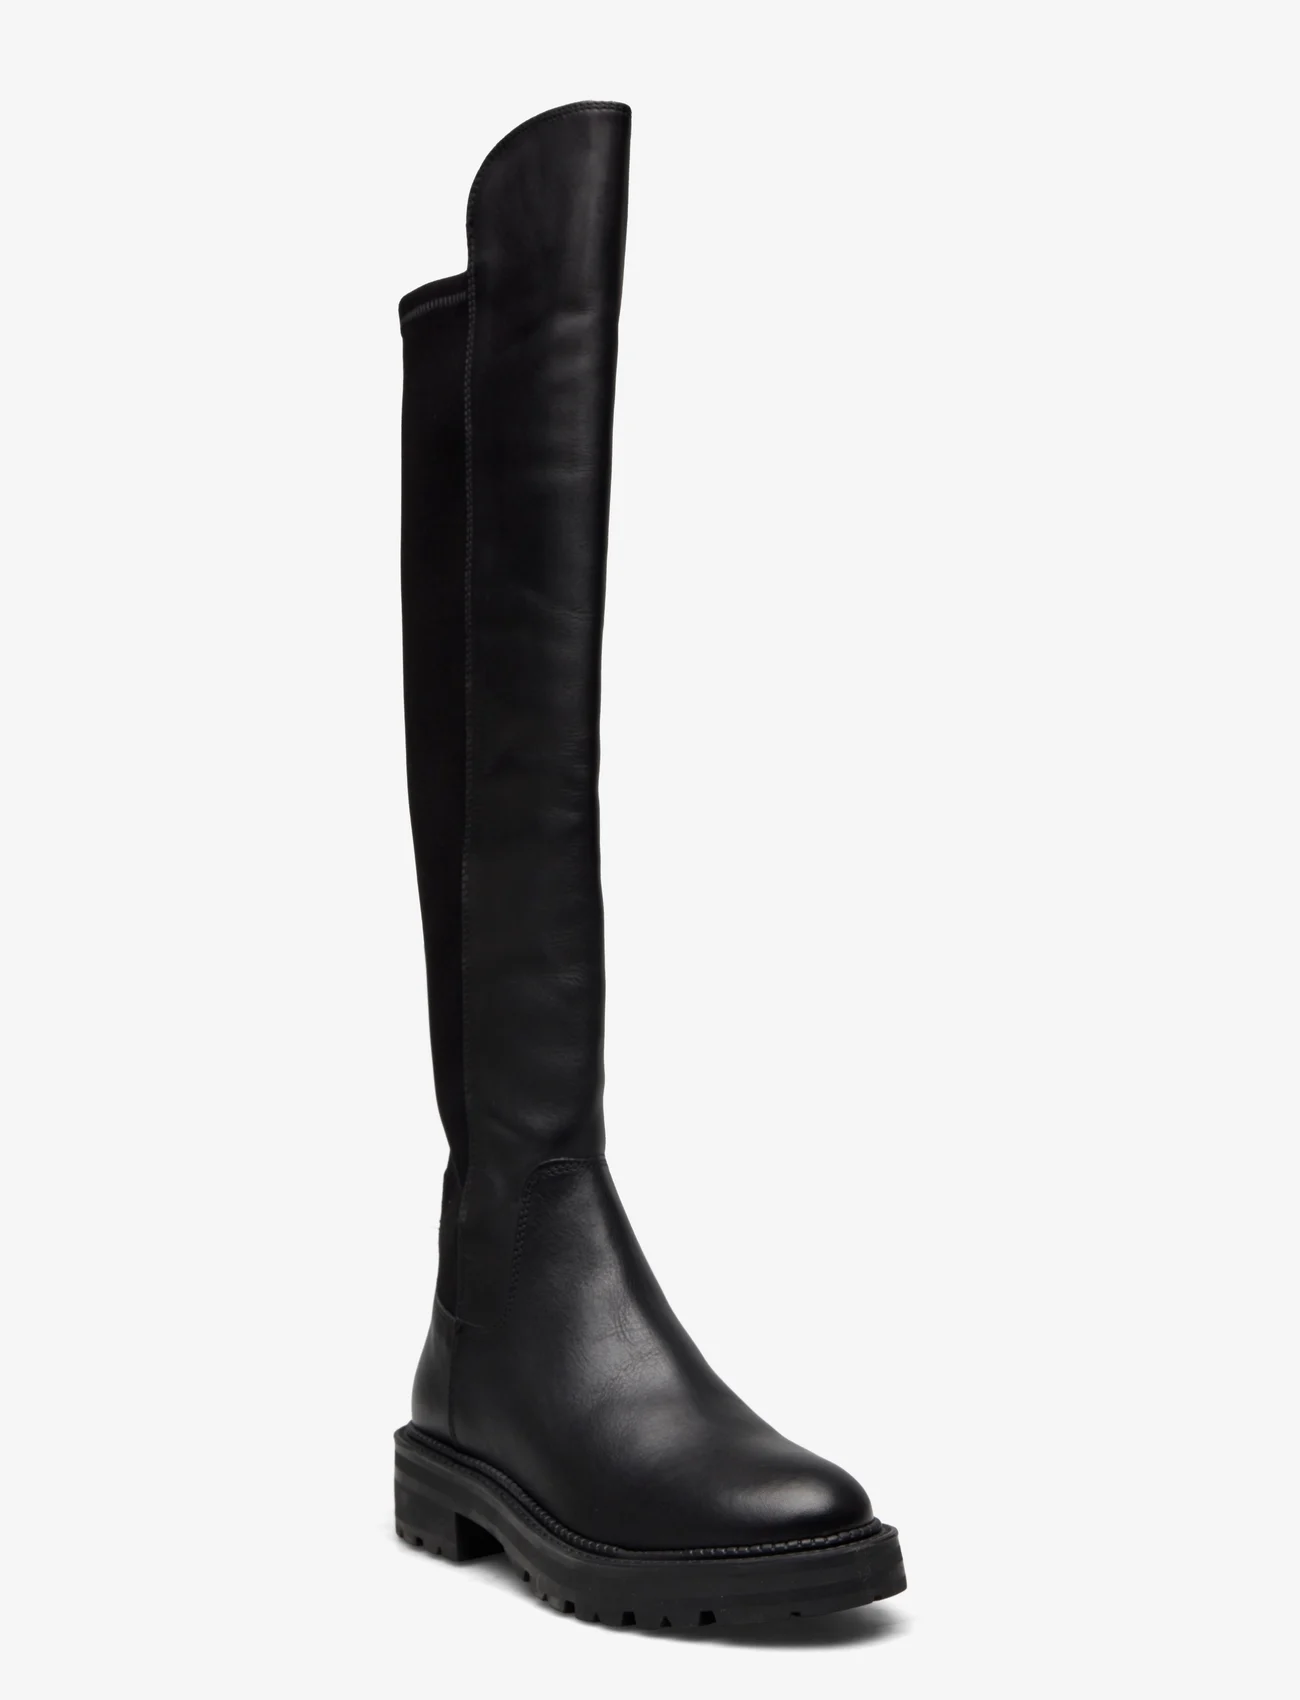 Dune London - tella - over-the-knee boots - black - 0